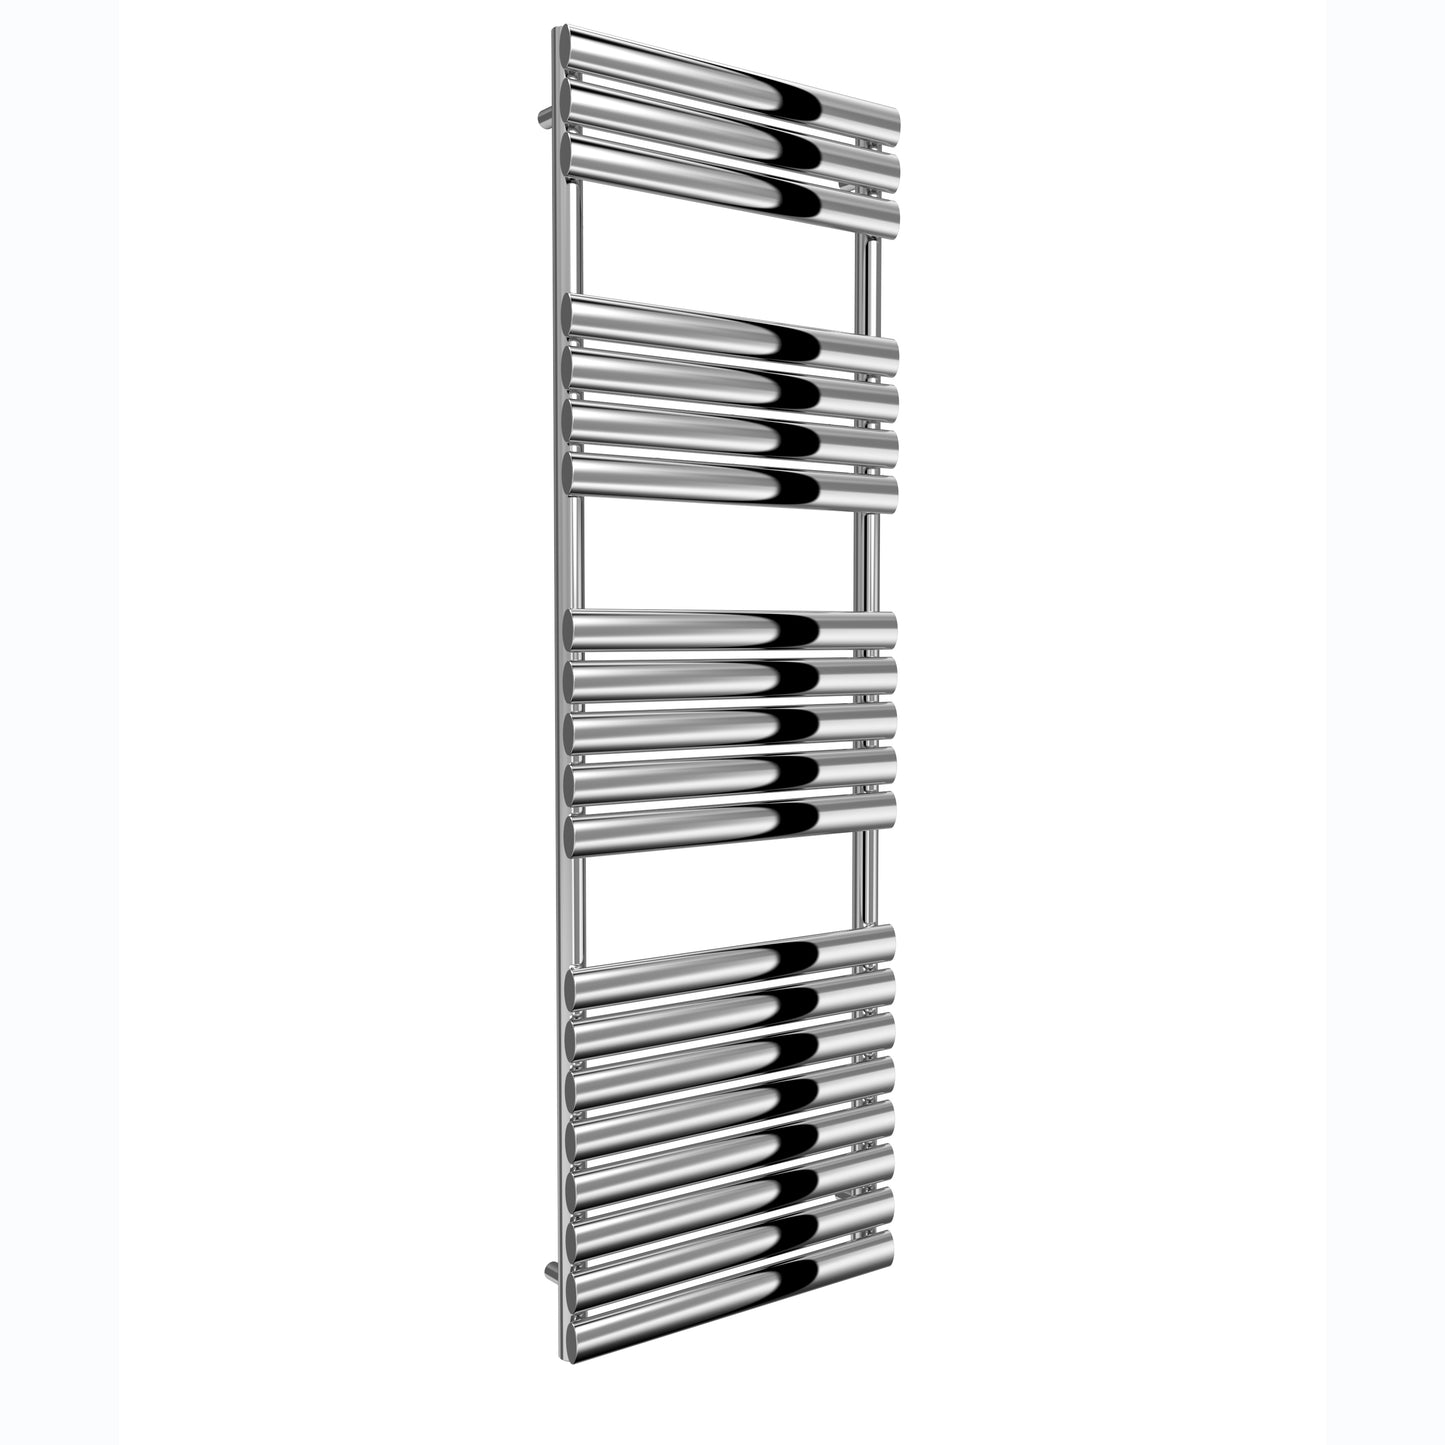 Helin Stainless Steel Heated Towel Rail - Various Sizes - Polished Stainless Steel